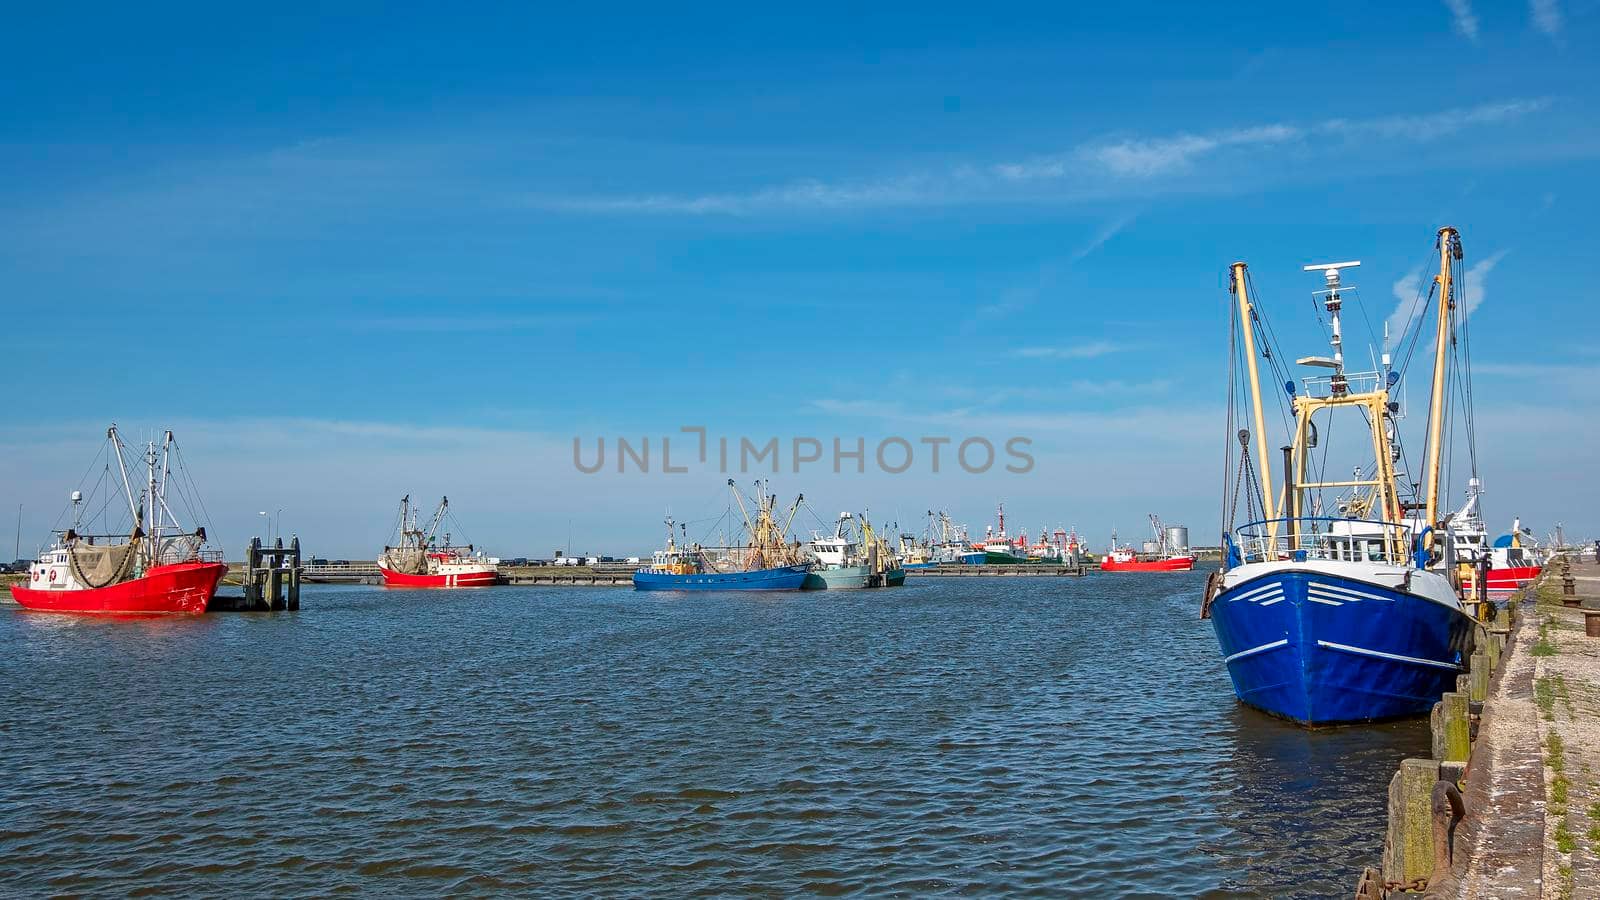 The fishing harbor in Lauwersoog Friesland the Netherlands